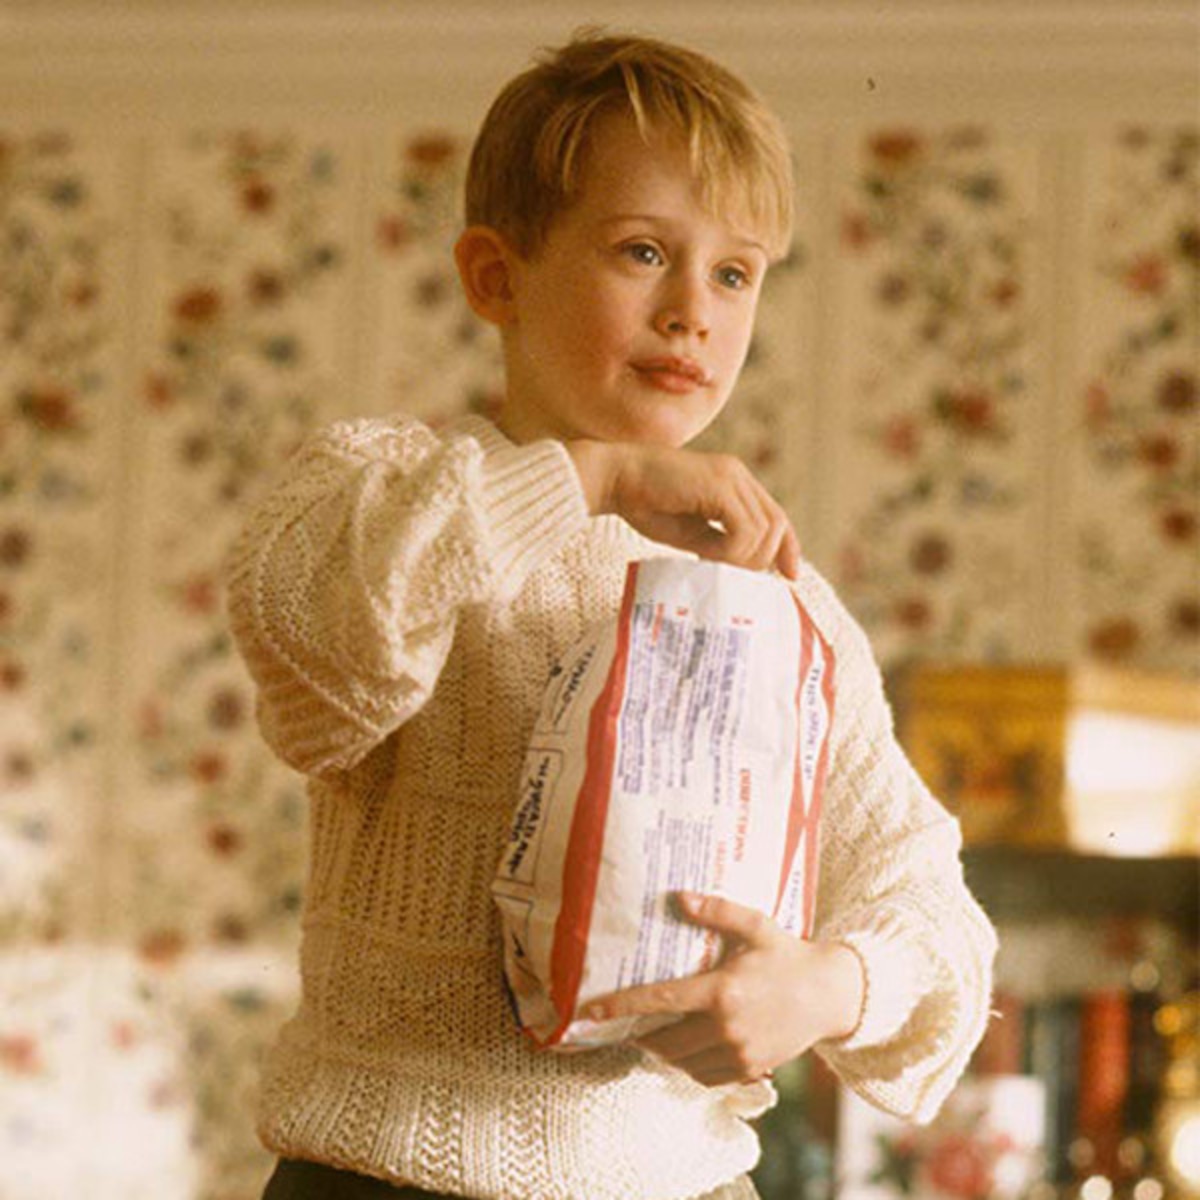 These Secrets About Home Alone Will Leave You Thirsty for More - E! Online